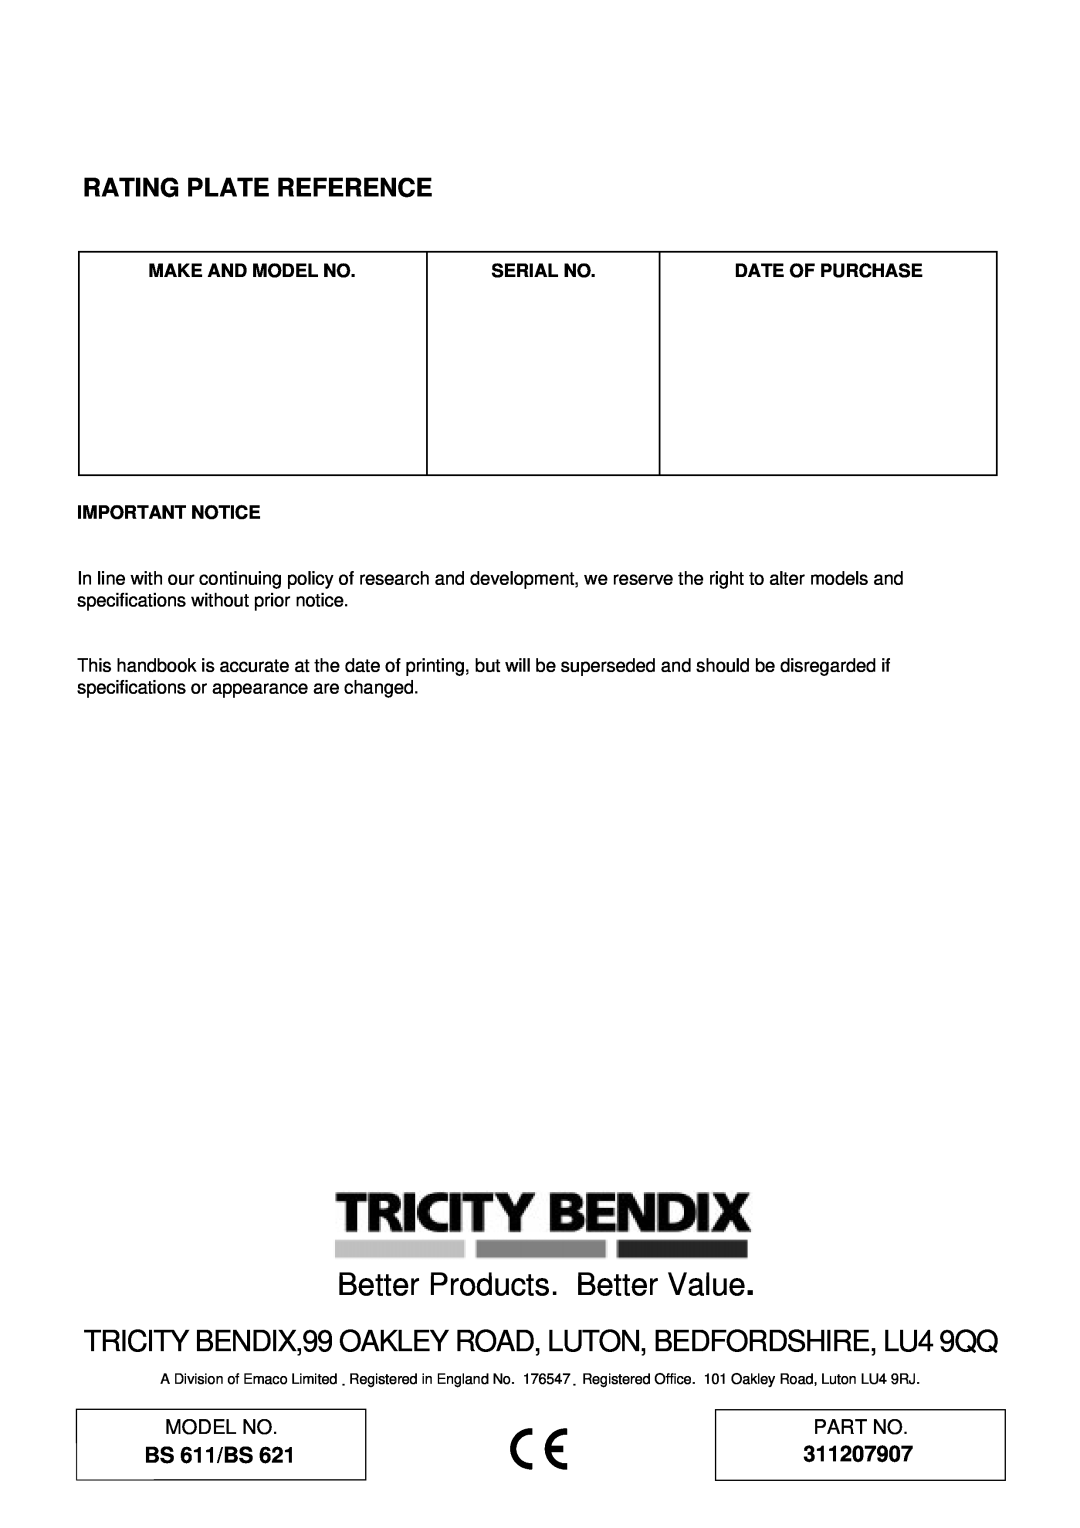 Tricity Bendix BS 611/BS 621 Rating Plate Reference, 311207907, Better Products. Better Value, Make And Model No 